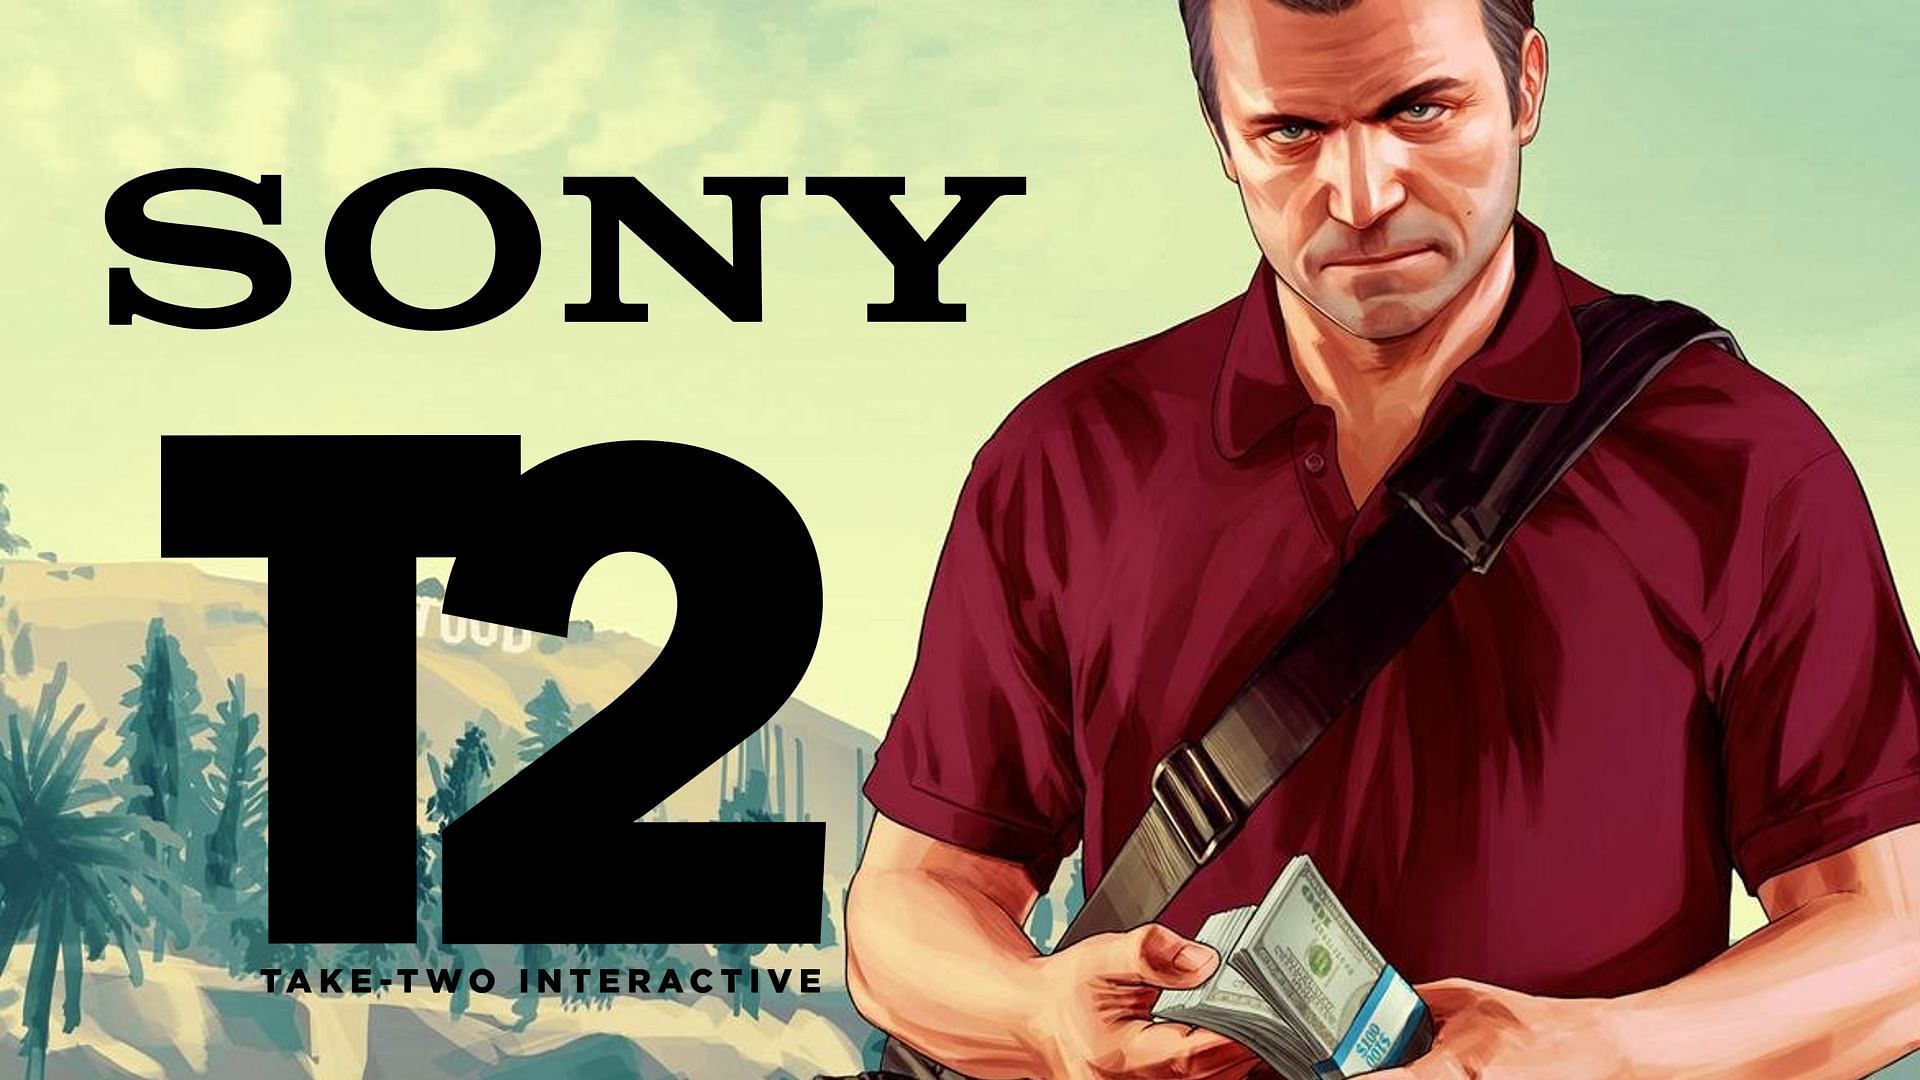 Rockstar Games Parent company Take-Two will release a remastered